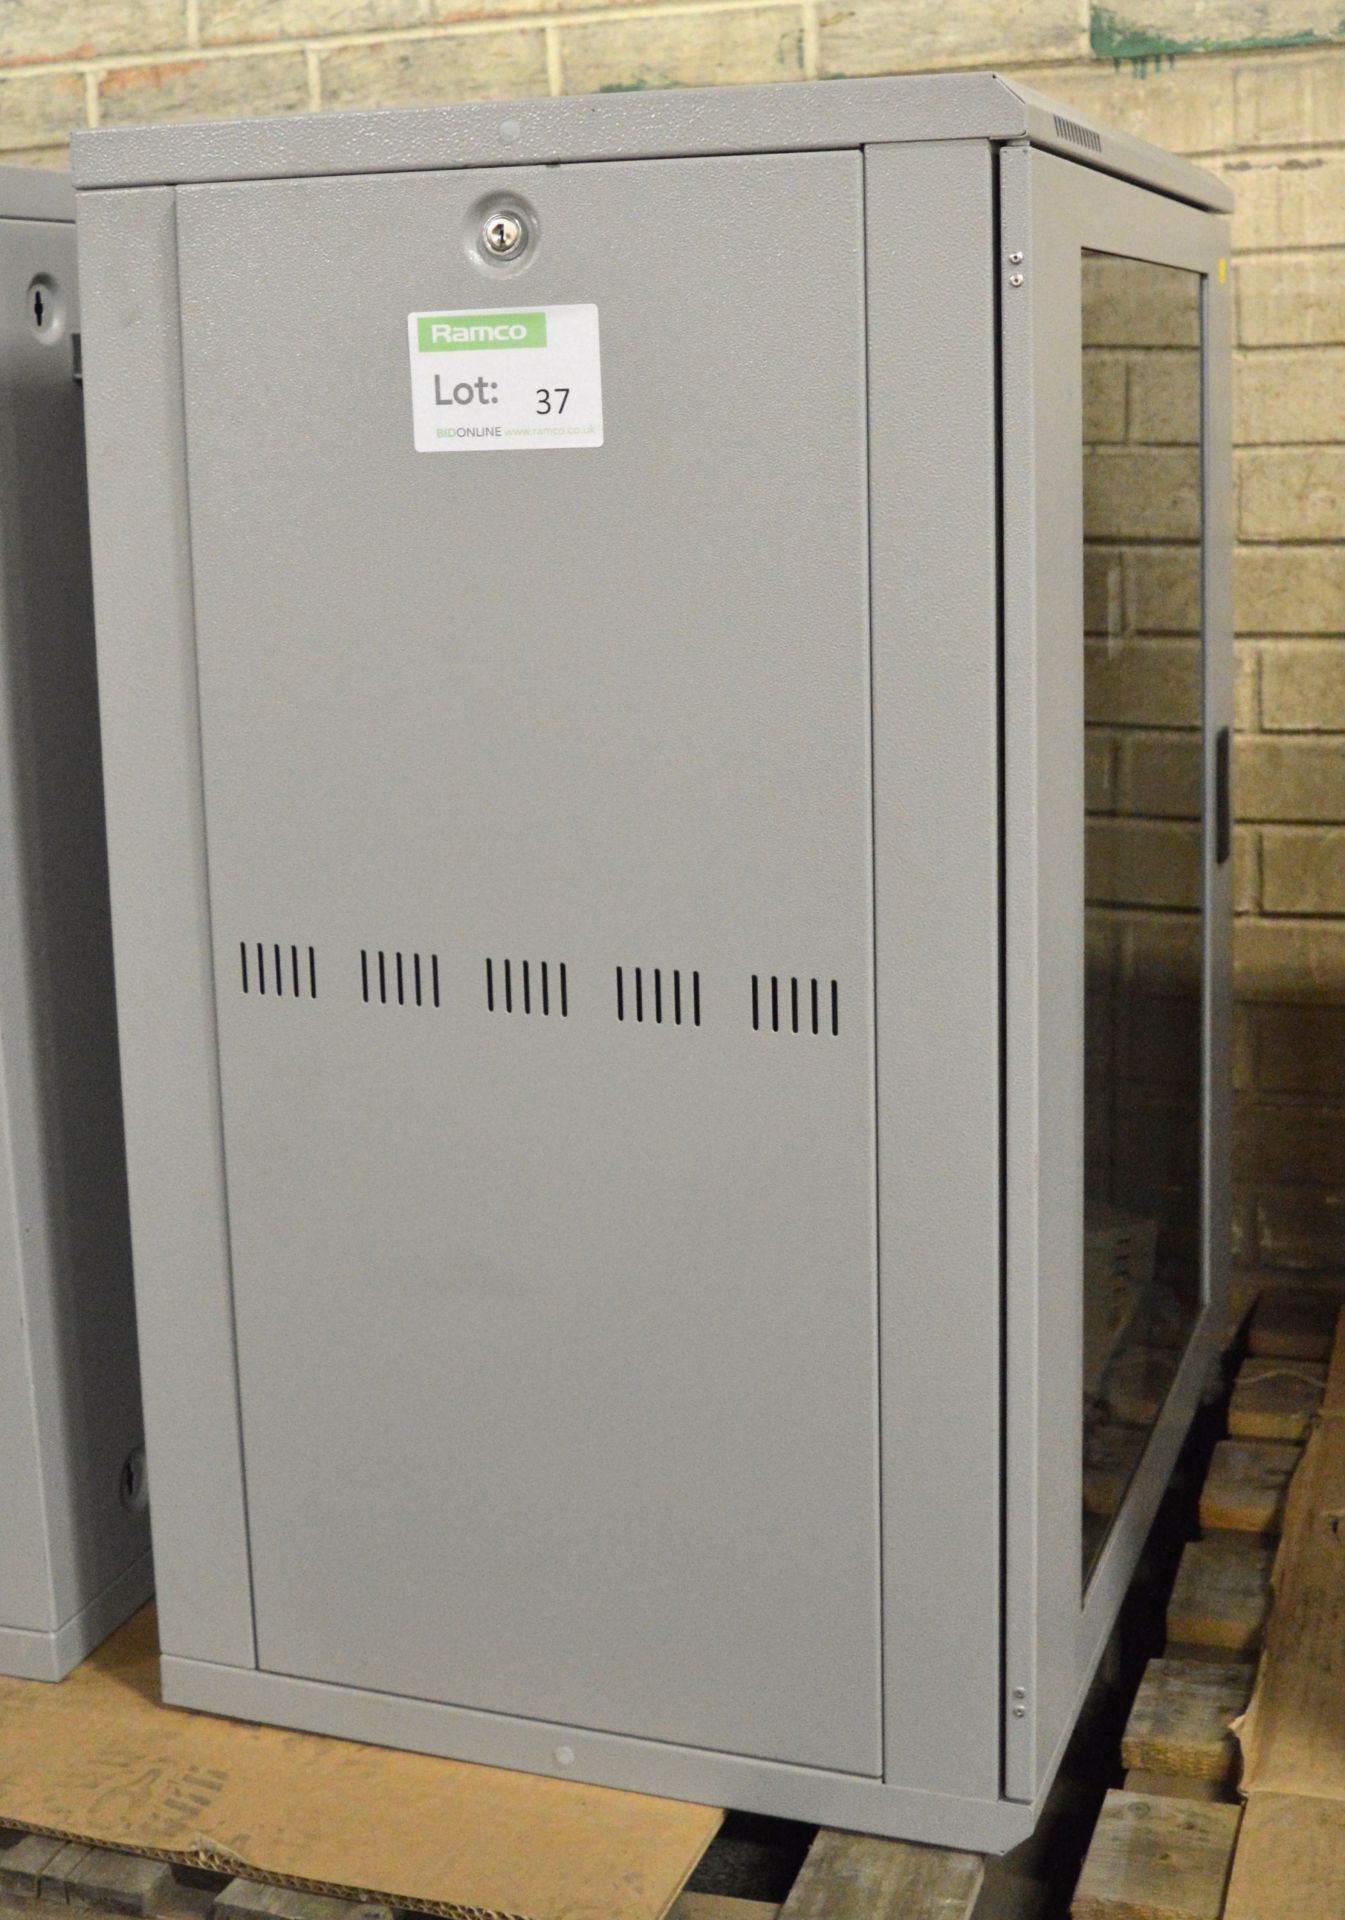 Cabinet with 19" Rack for Electrical Equipment - Some cabling included.